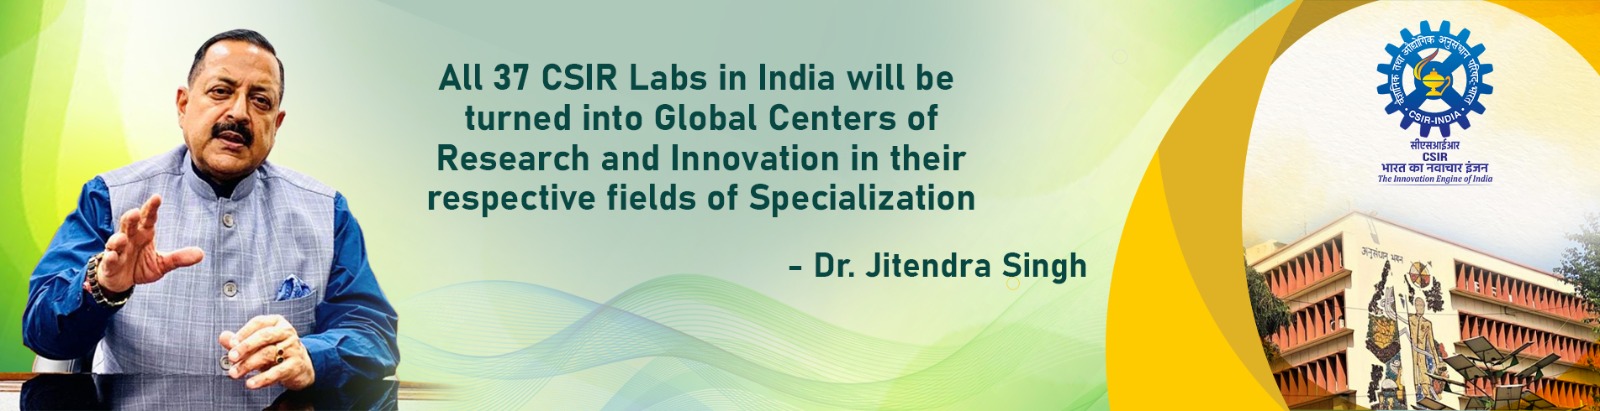 All 37 CSIR Labs in India Will be Turned into Global Centers of Research And Innovation